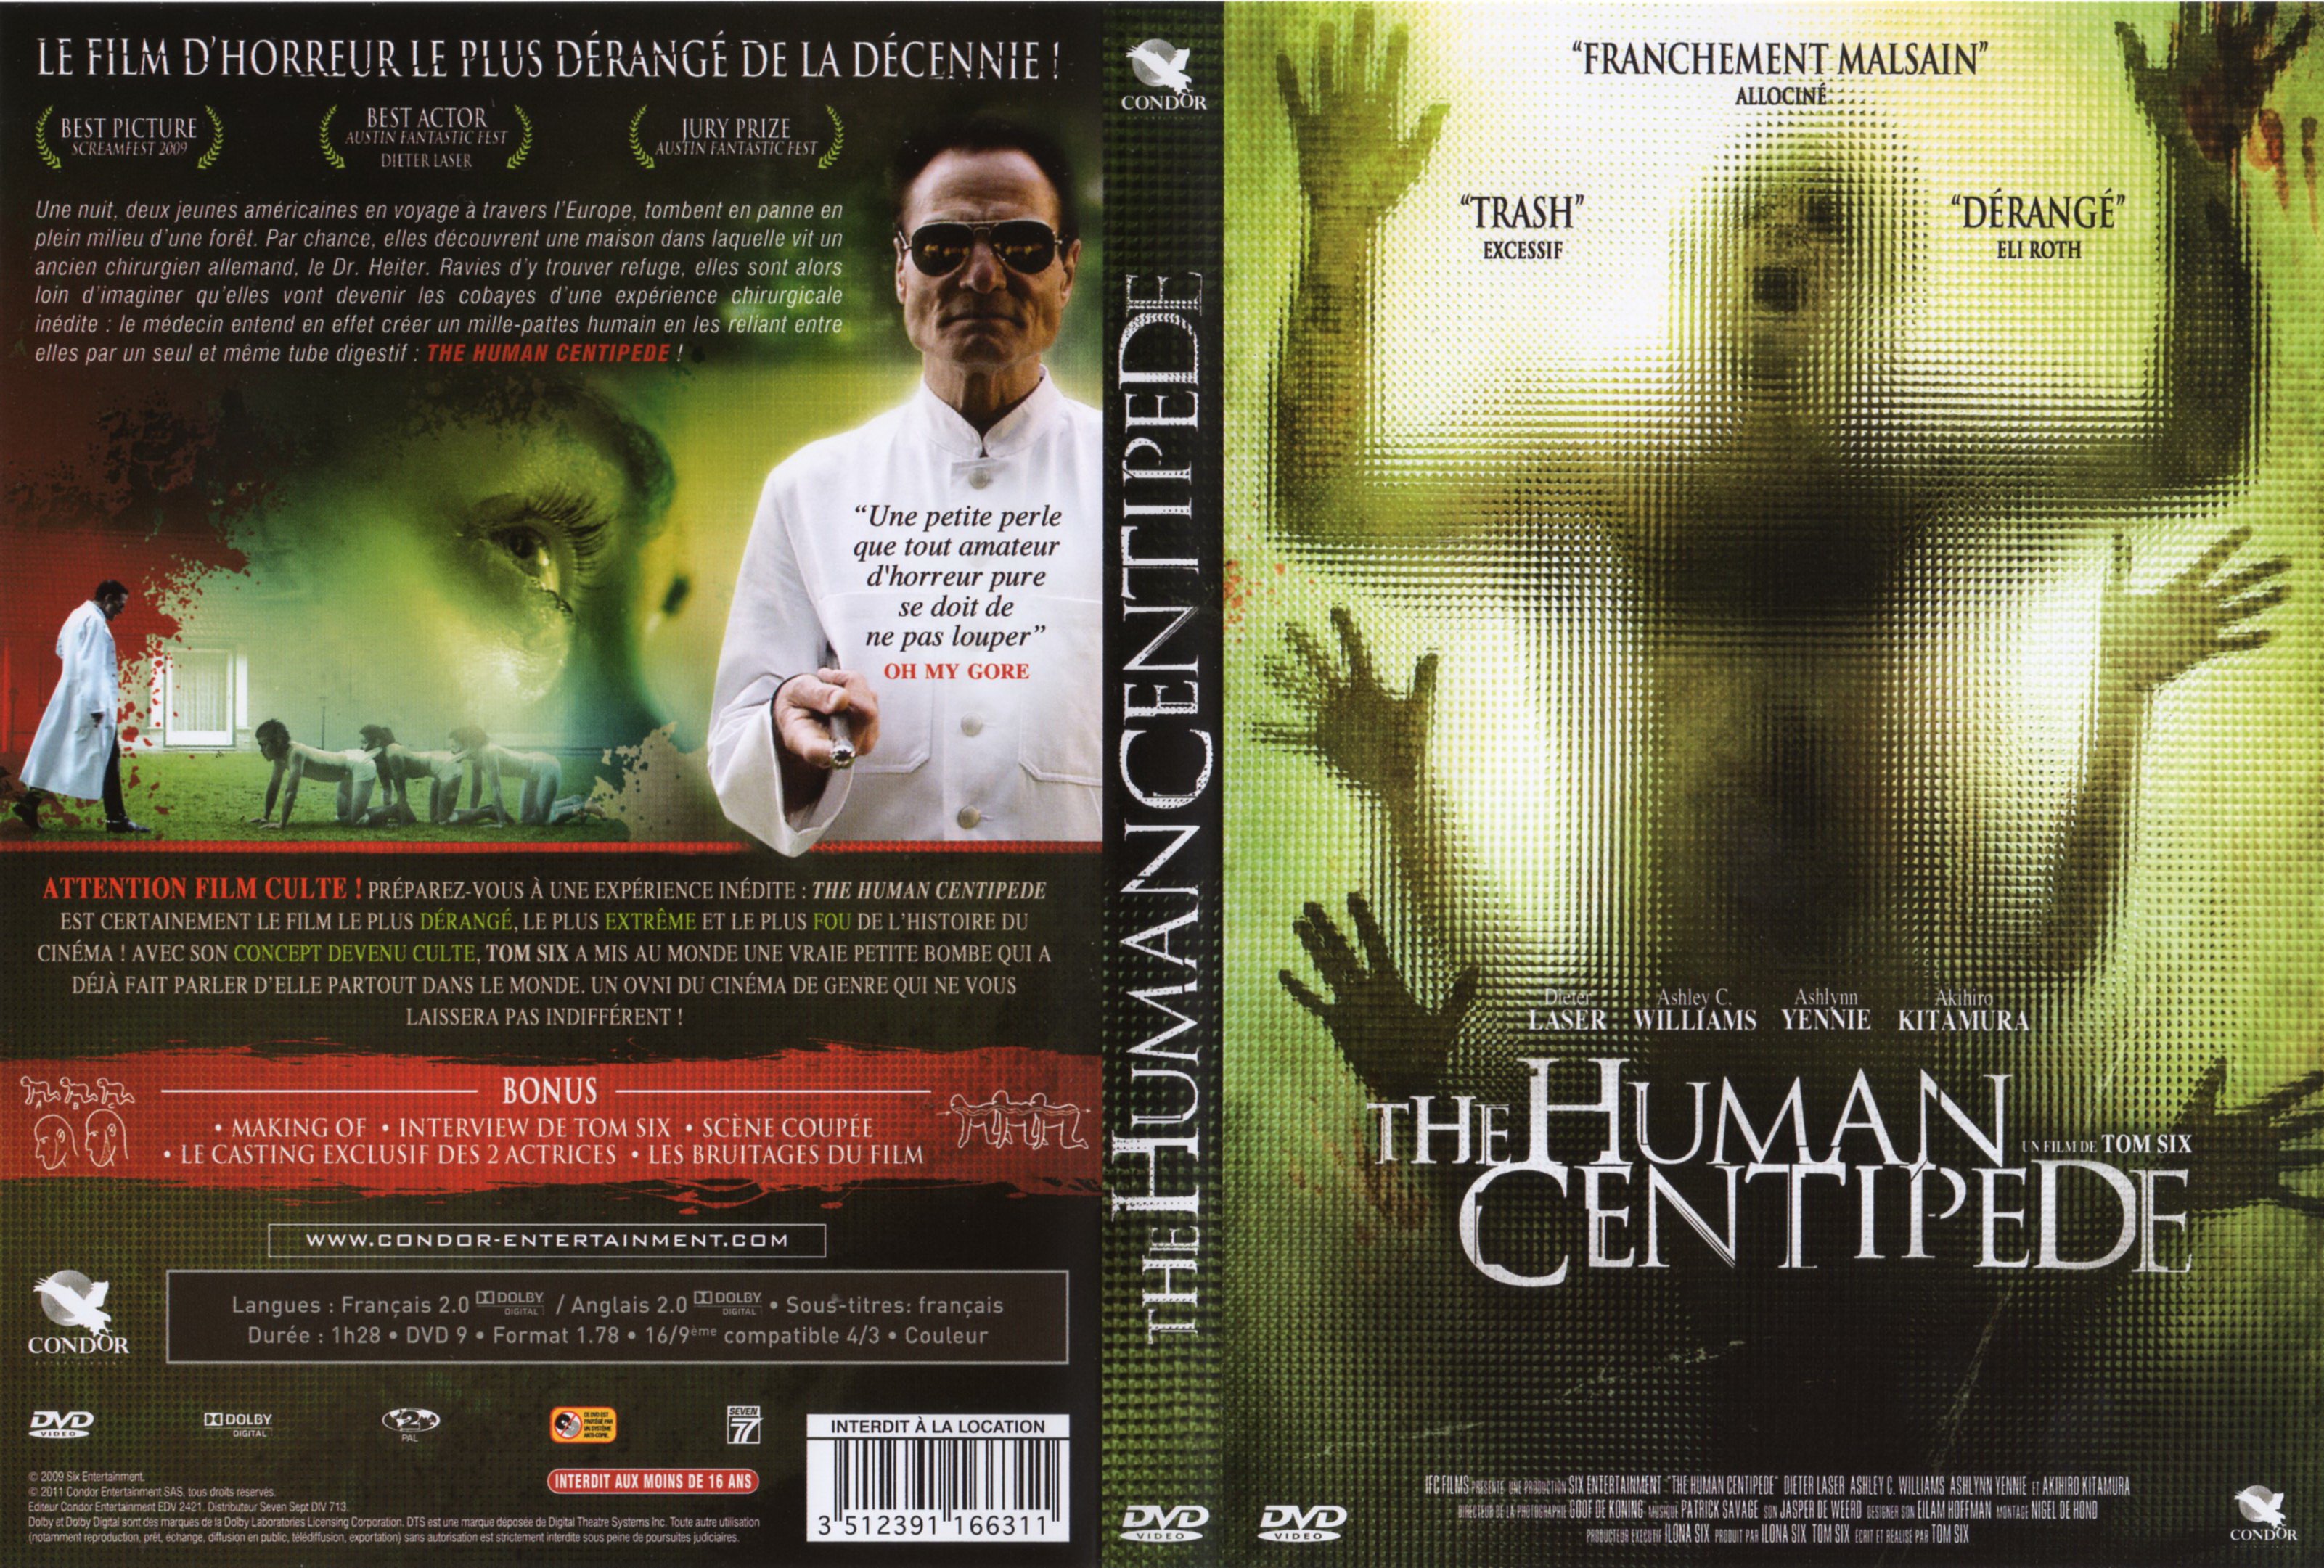 Jaquette DVD The human centipede